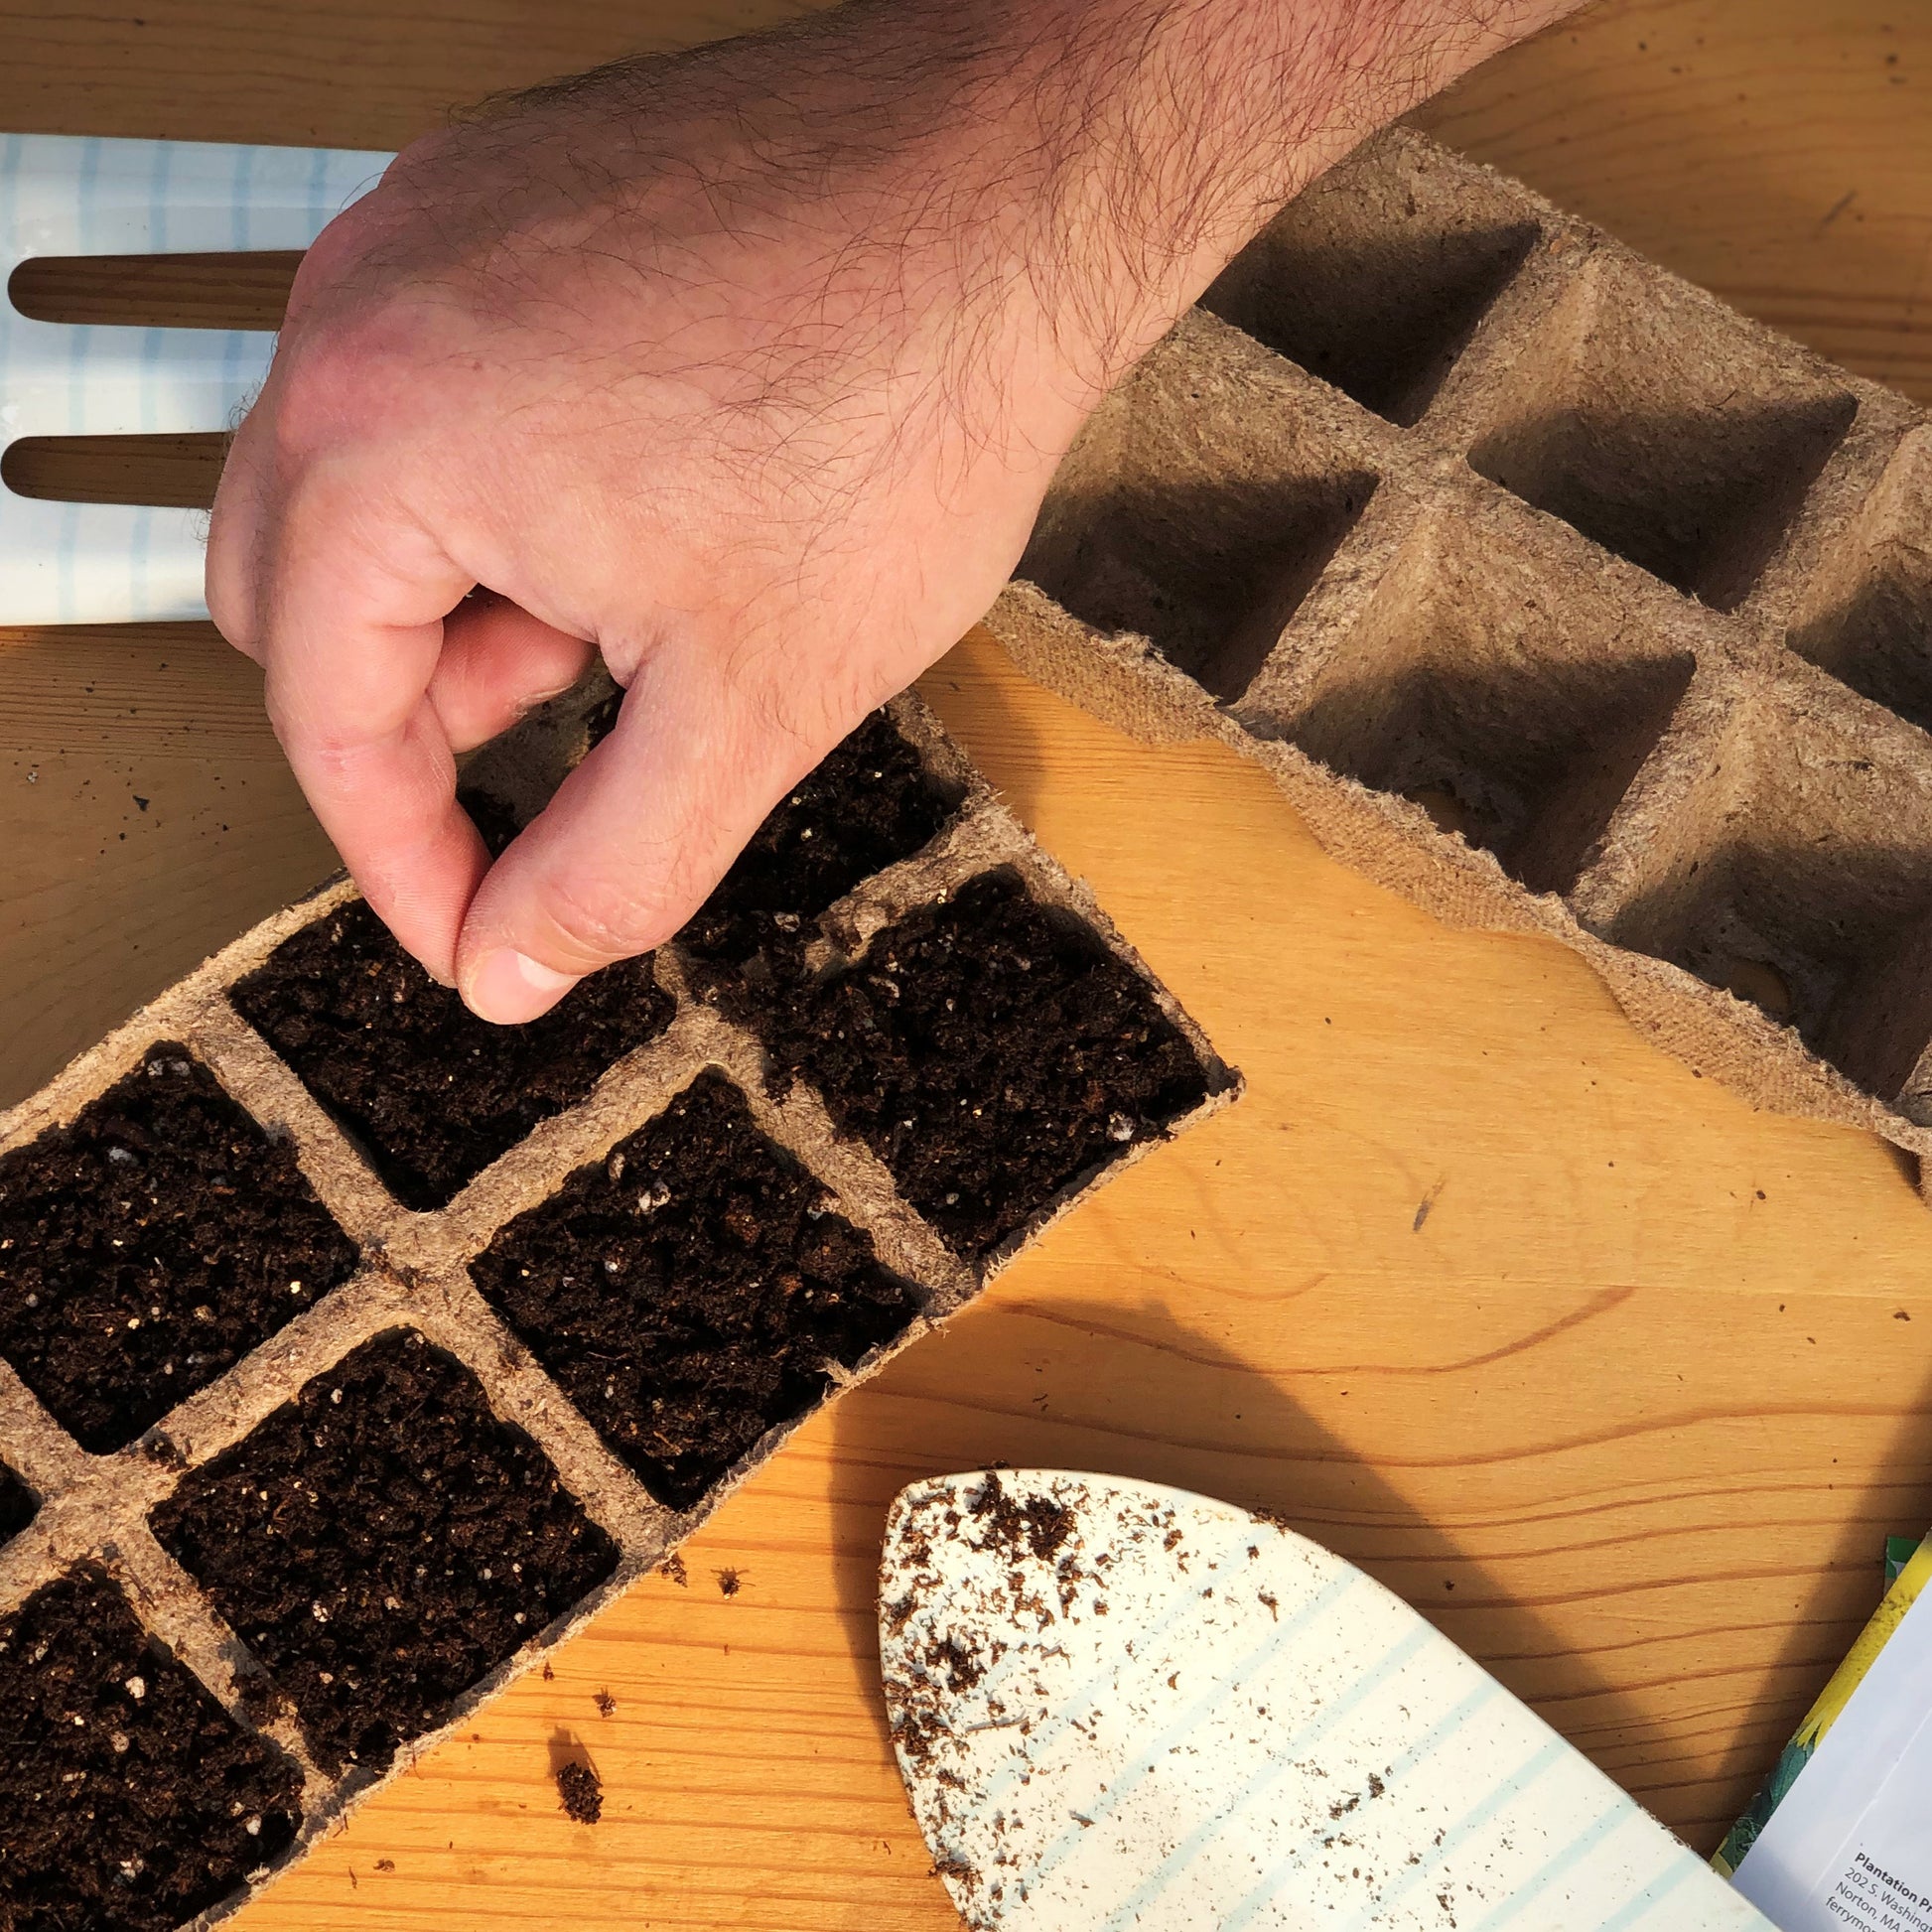 Sowing De Cicco Broccoli Seeds into Jiffy peat strip trays filled with Jiffy seed starting mix.